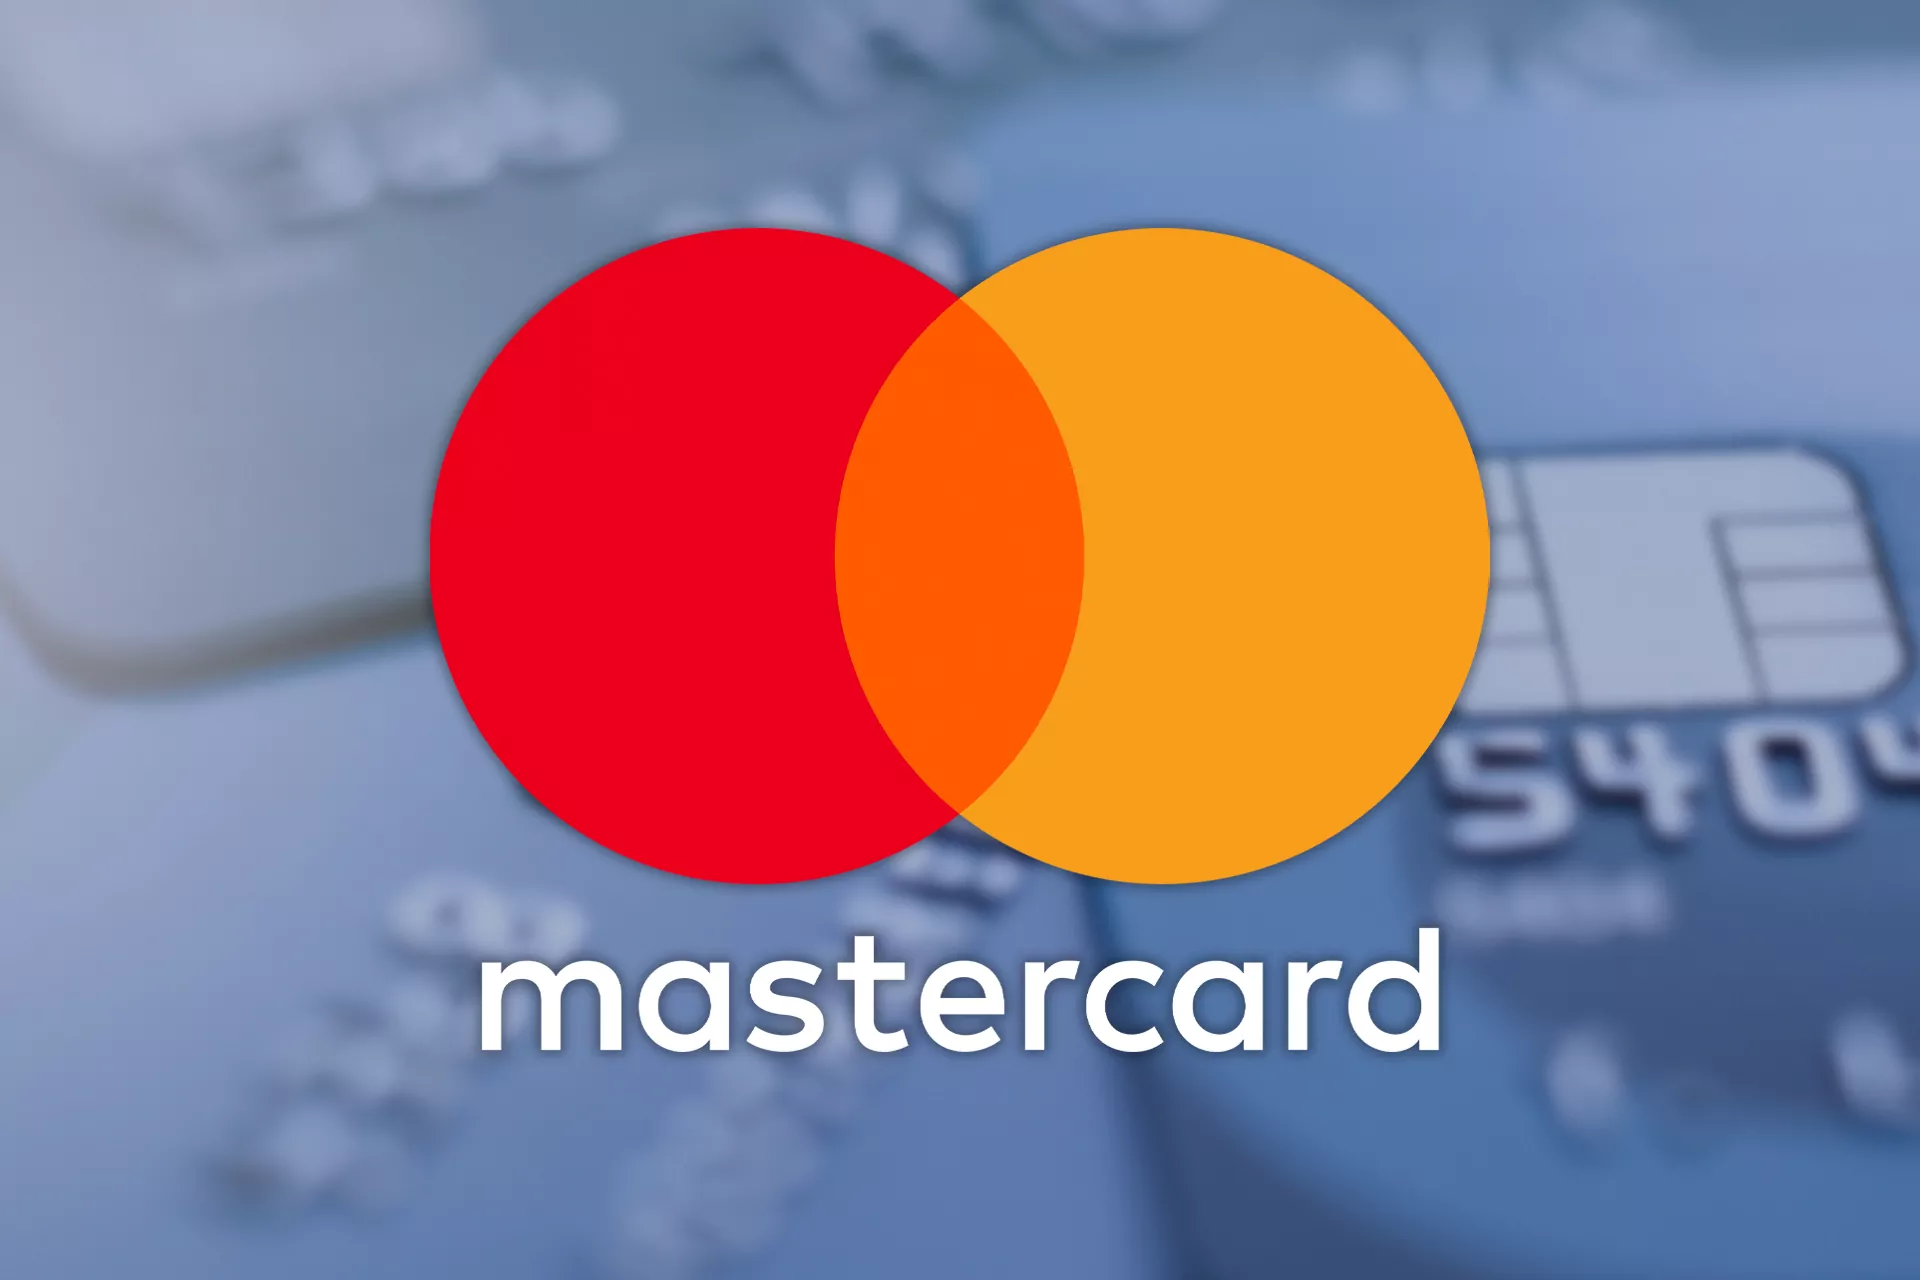 Mastercard is one of the most worldwide famous payment systems that serve lots of bank cards all over the world.